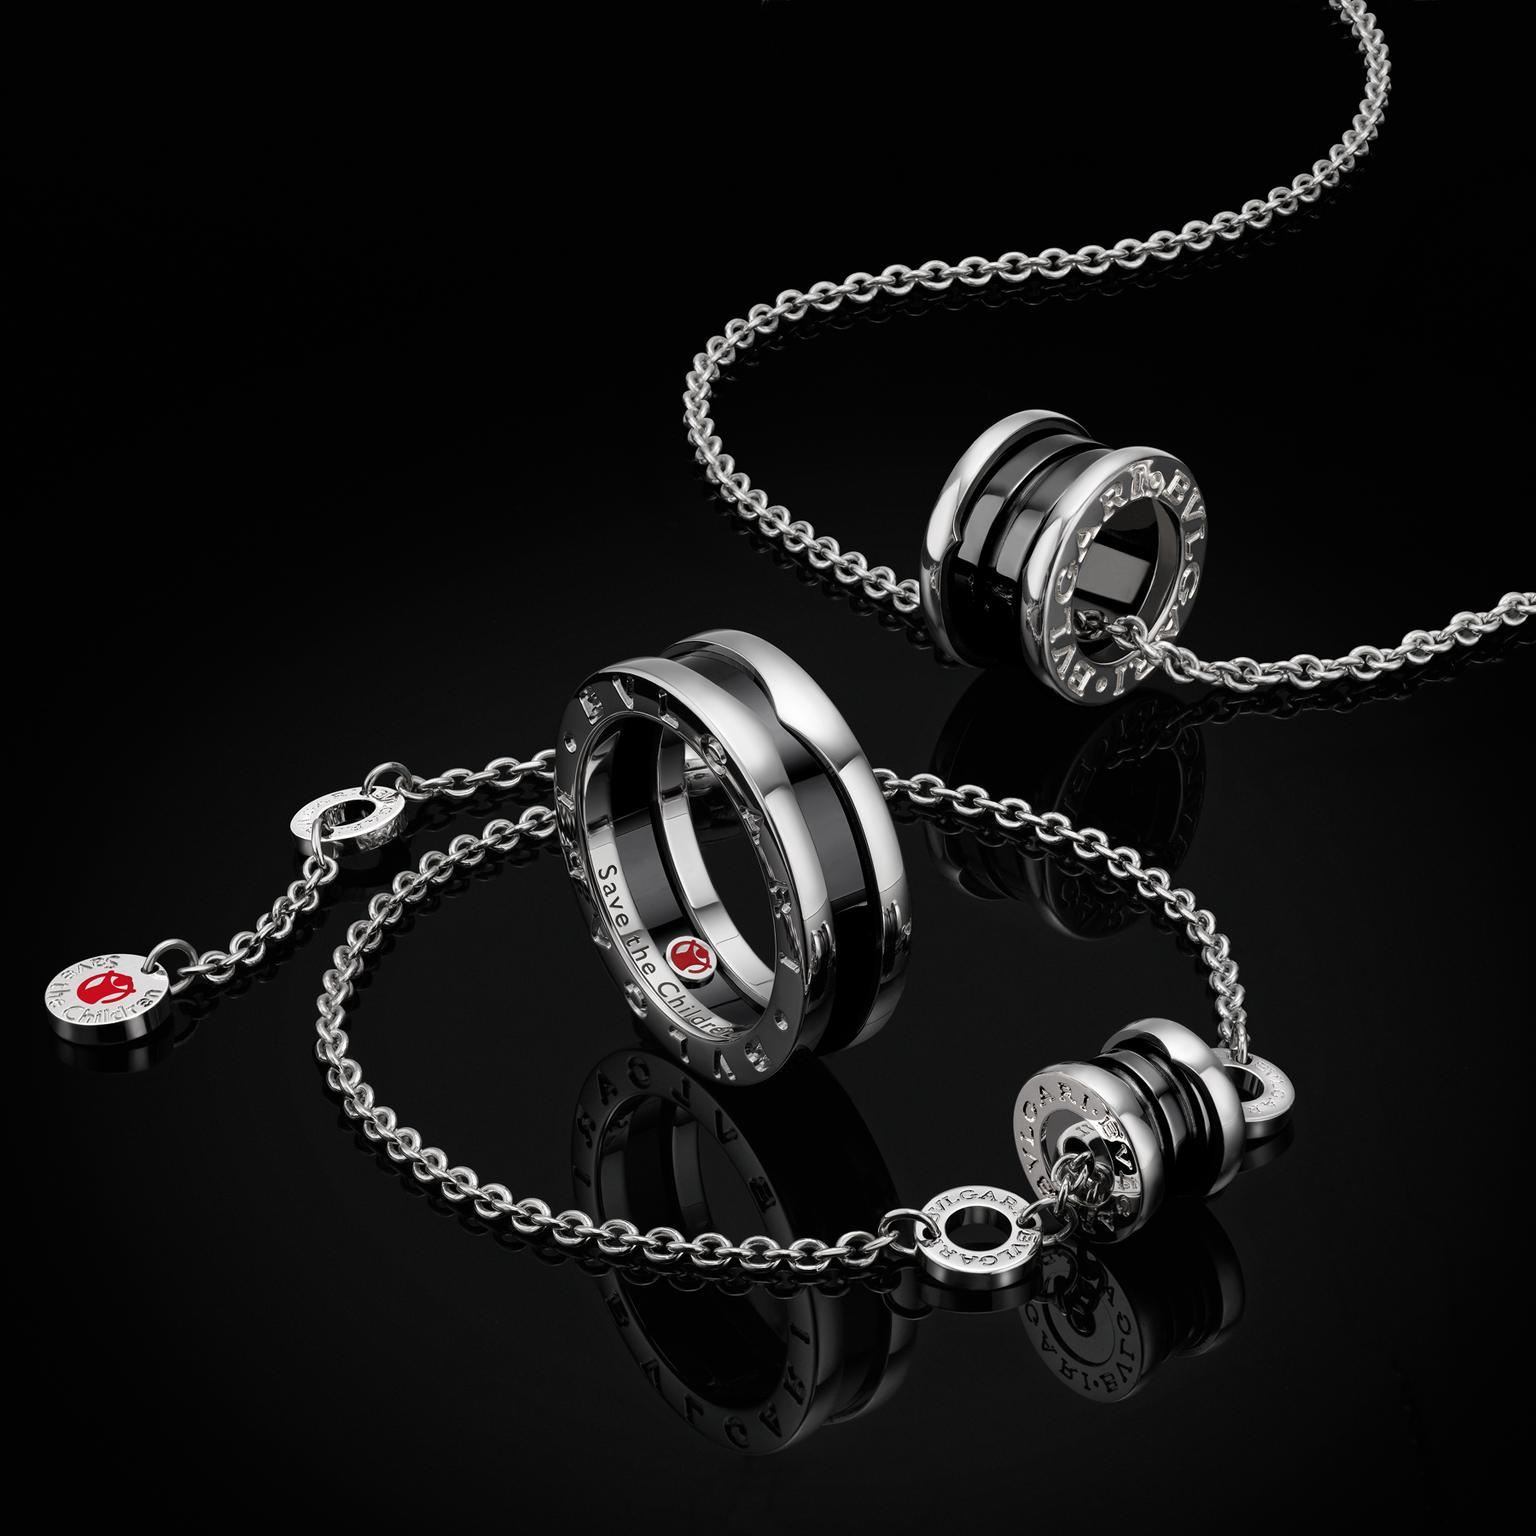 Bulgari silver jewels for Save the Children